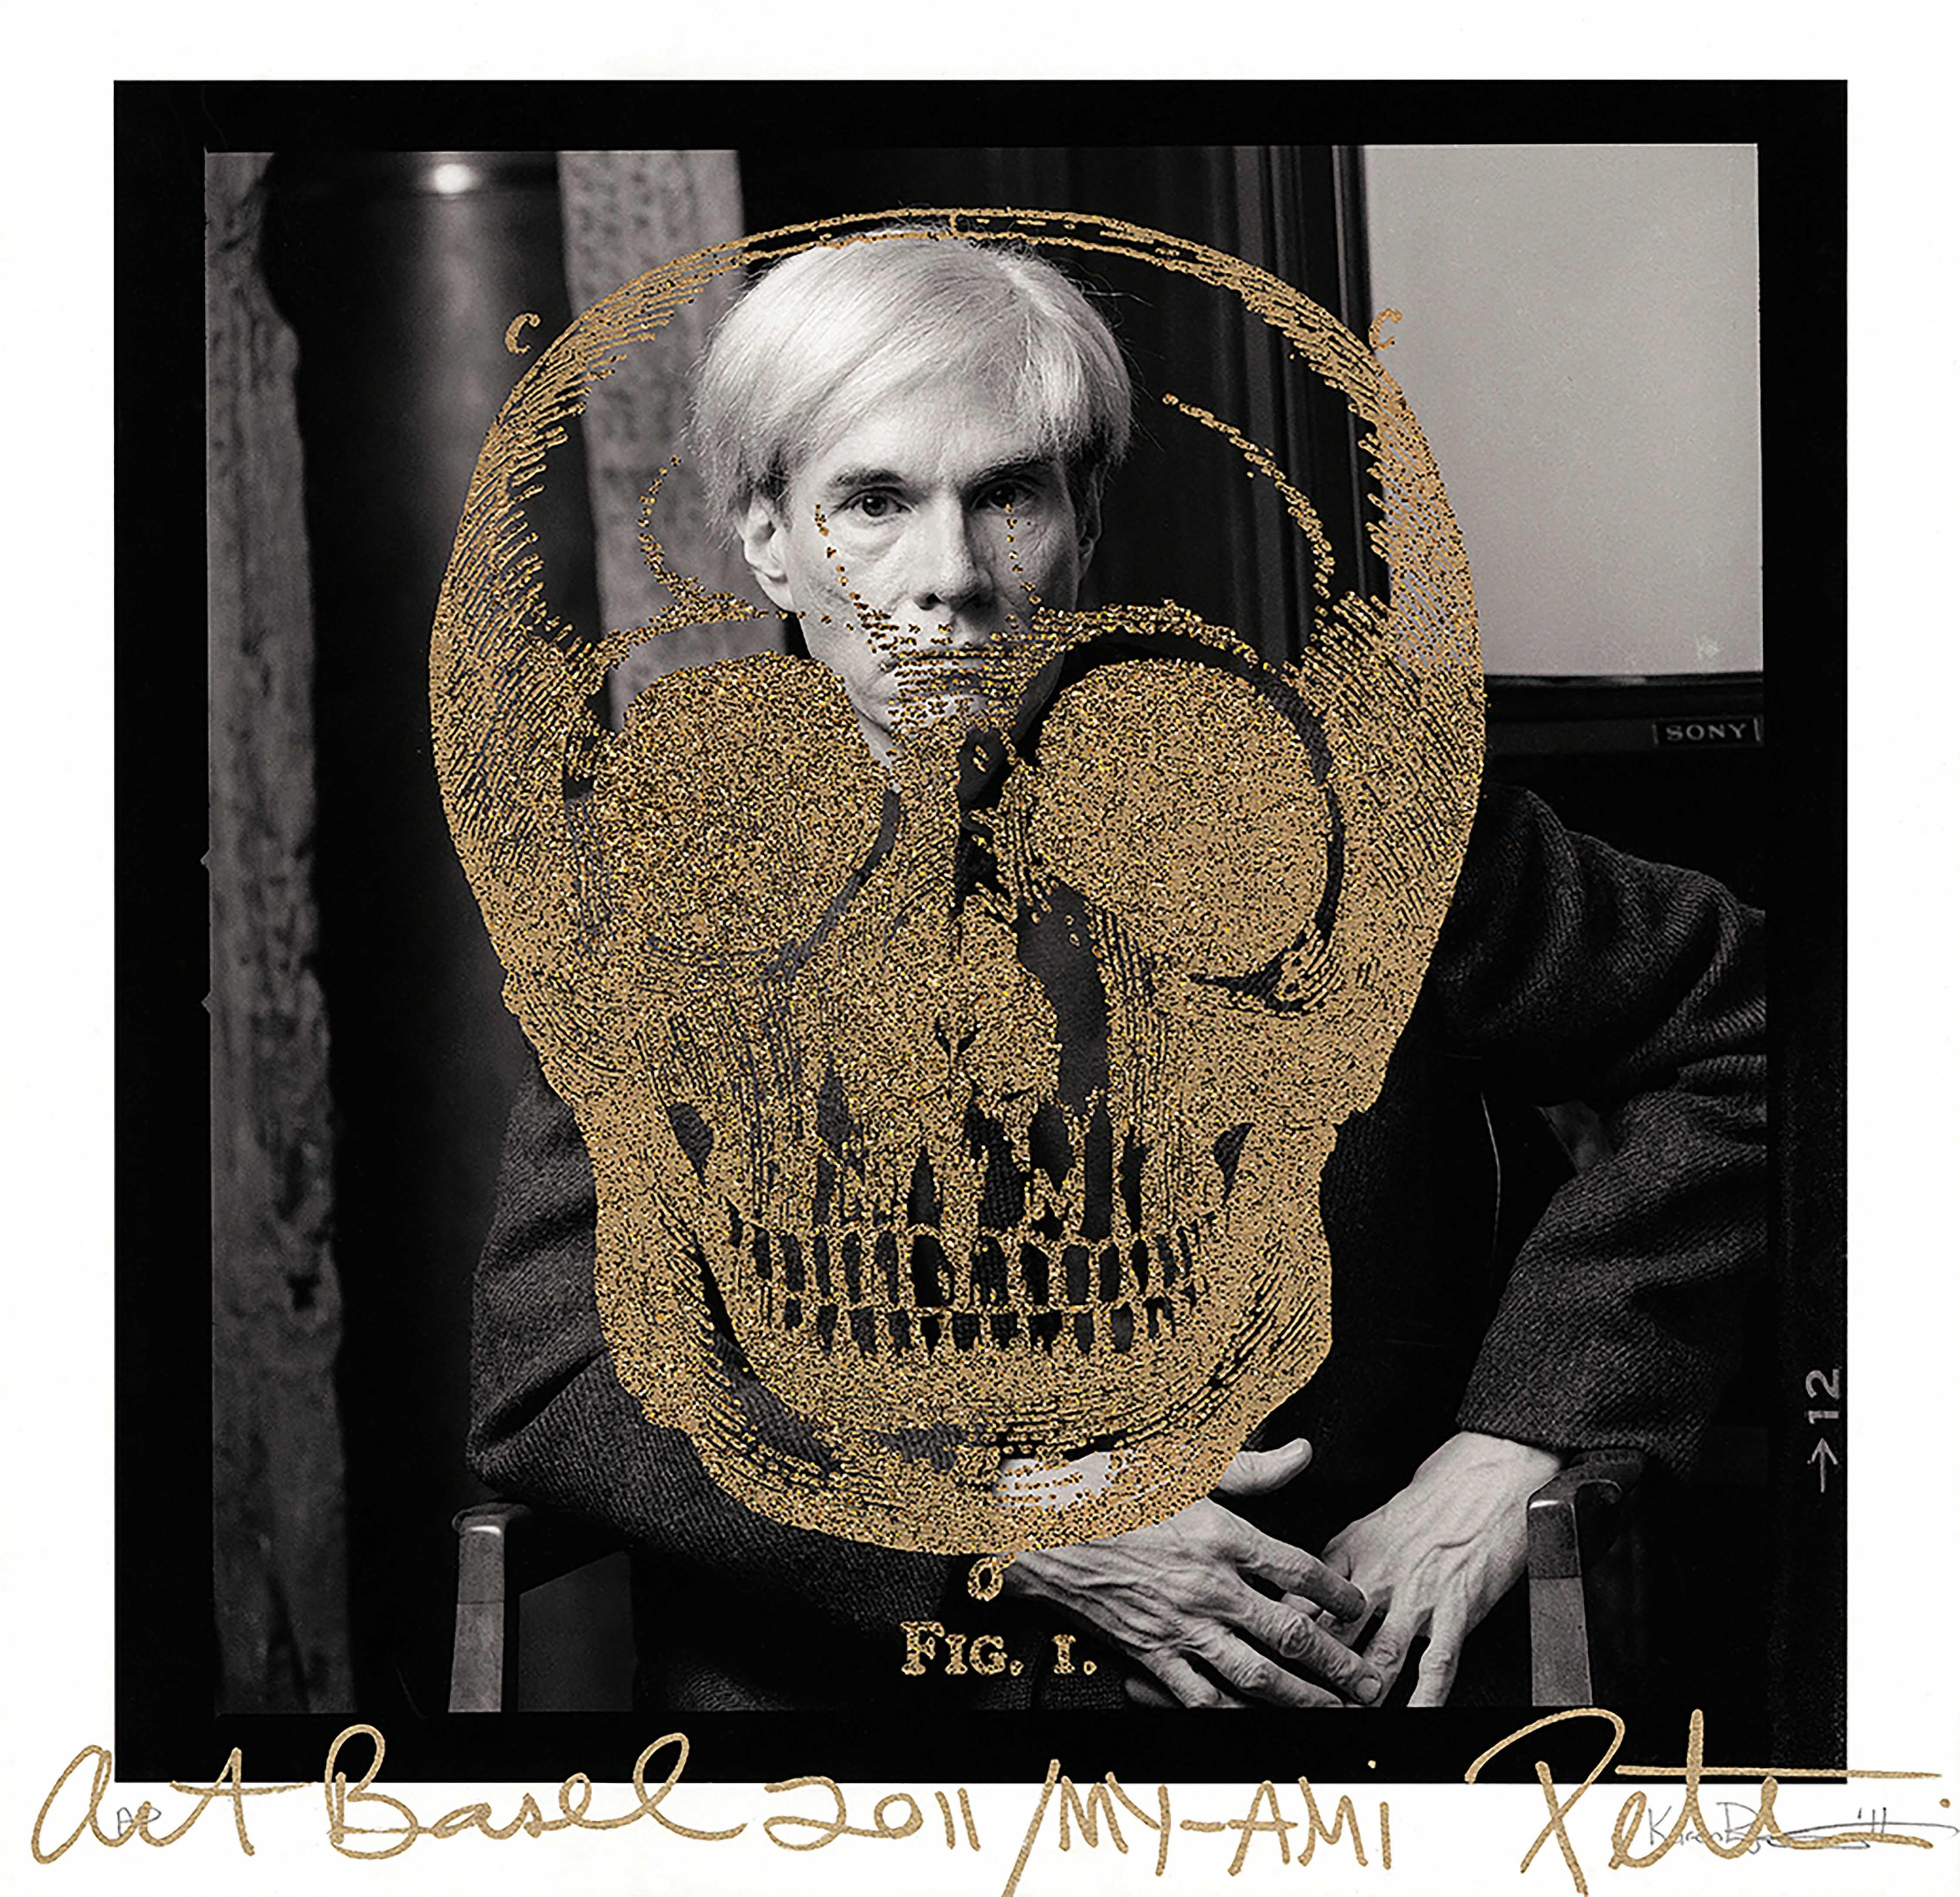 Karen Bystedt and Peter Tunney Abstract Photograph - Gold Britannica Skull on Warhol, 2011